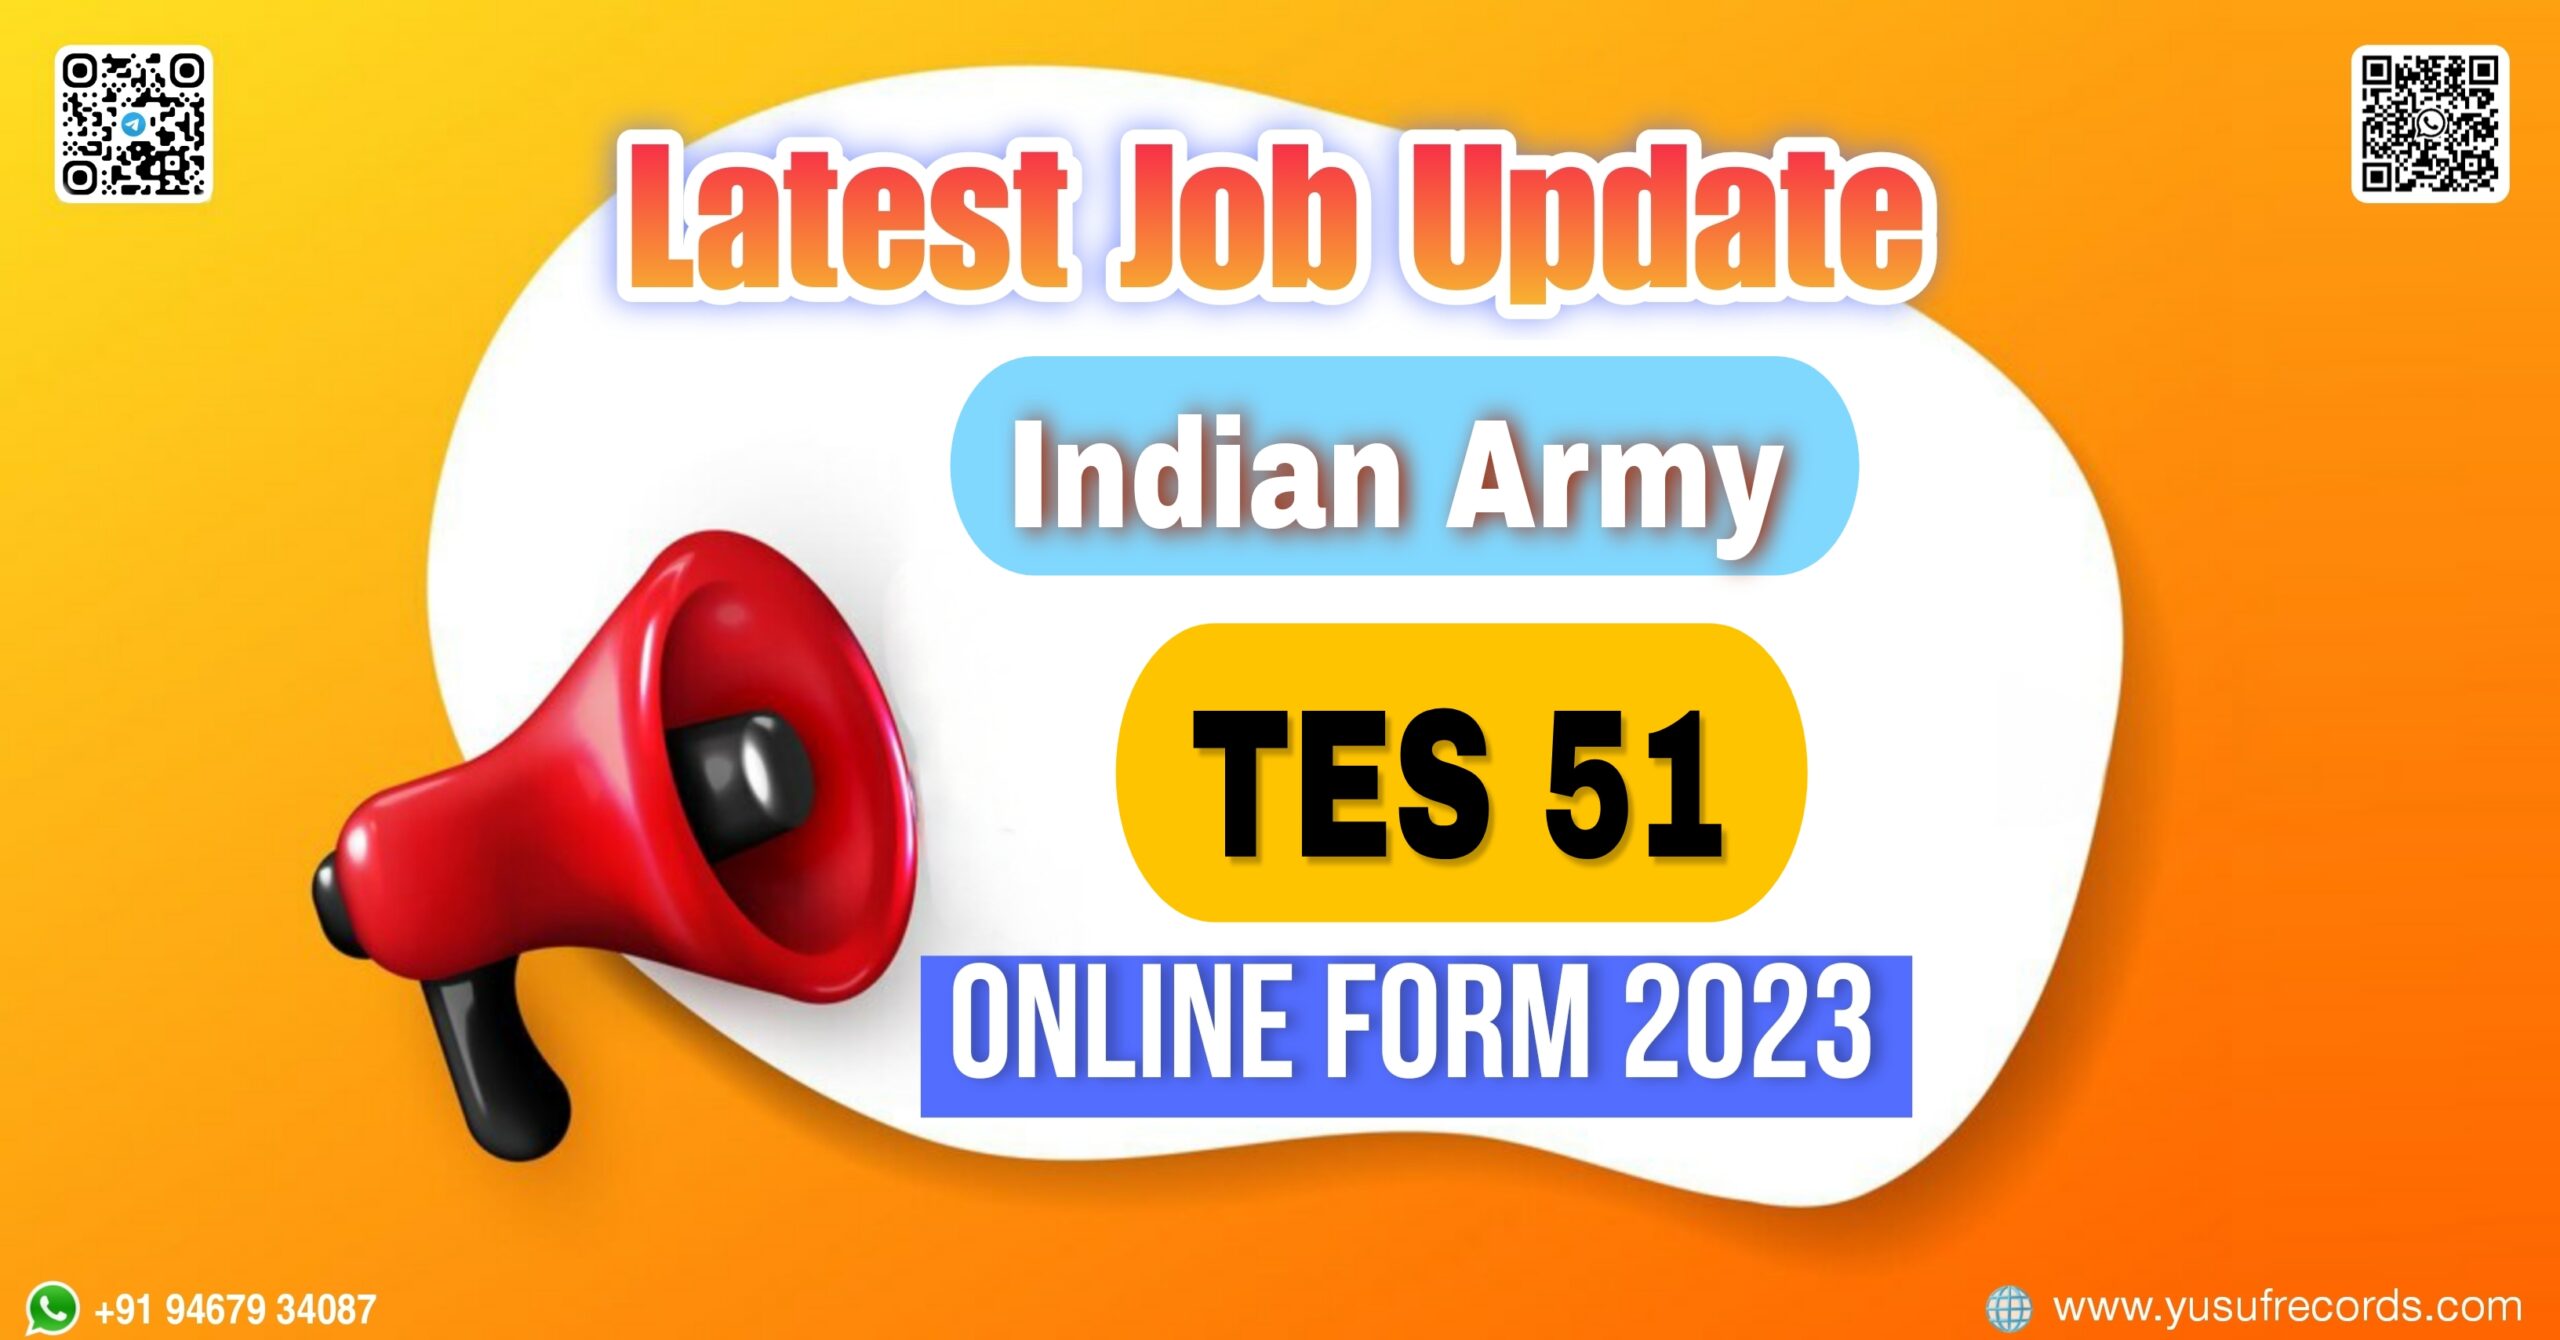 Indian Army TES 51 Online Form 2023 yusufrecords latest job updates govt jobs updates